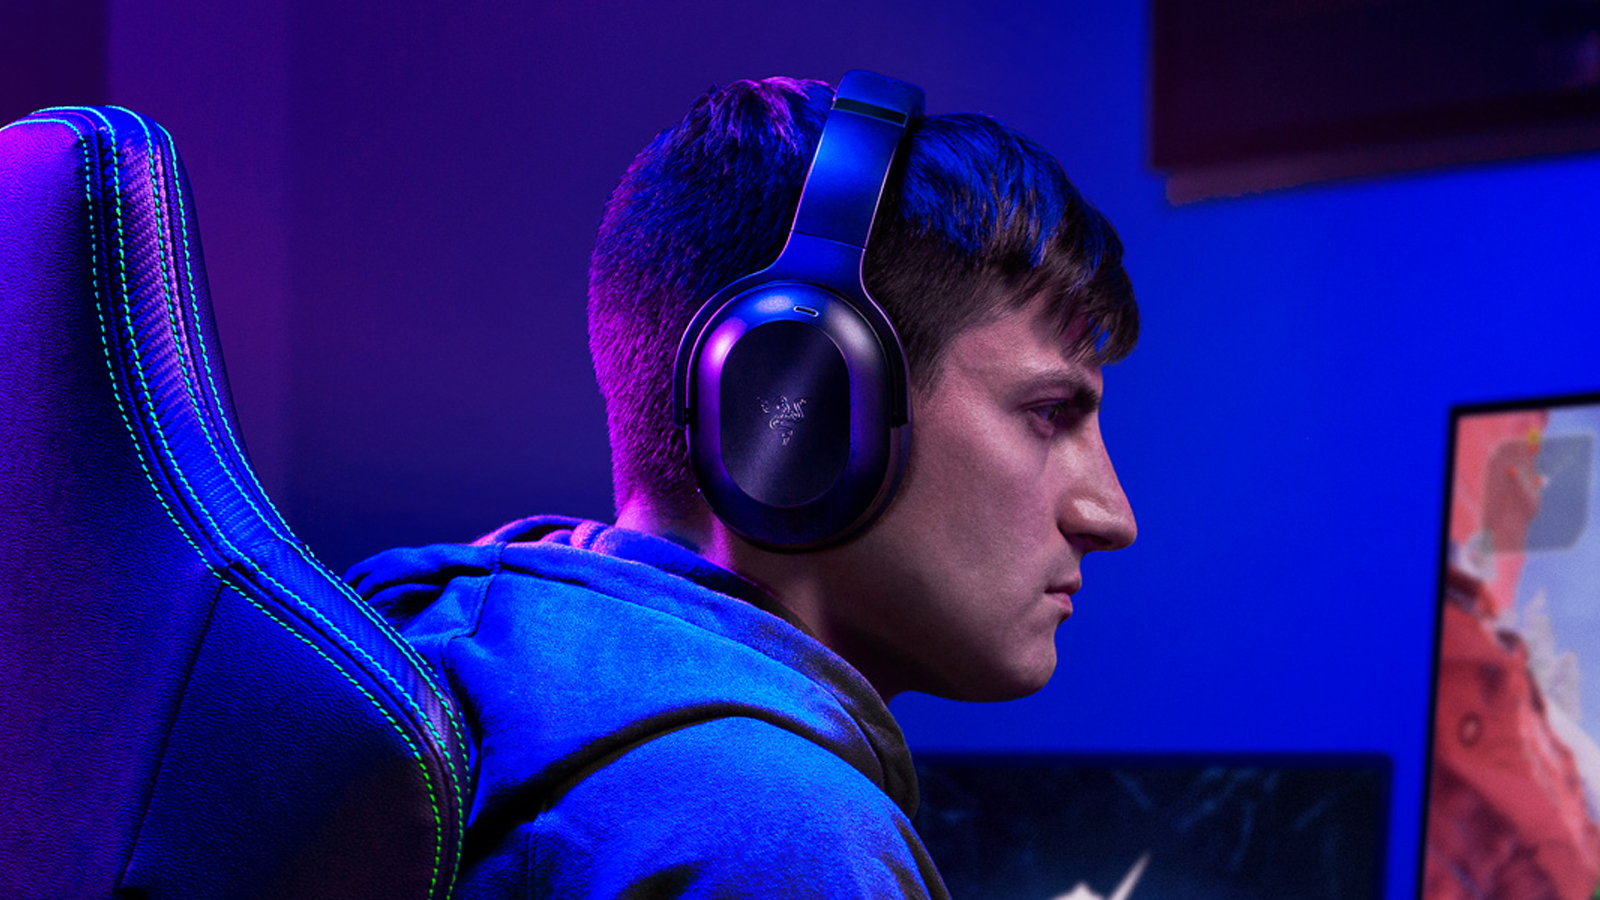 Gaming takes to the Streets with the New Razer Barracuda Line Up